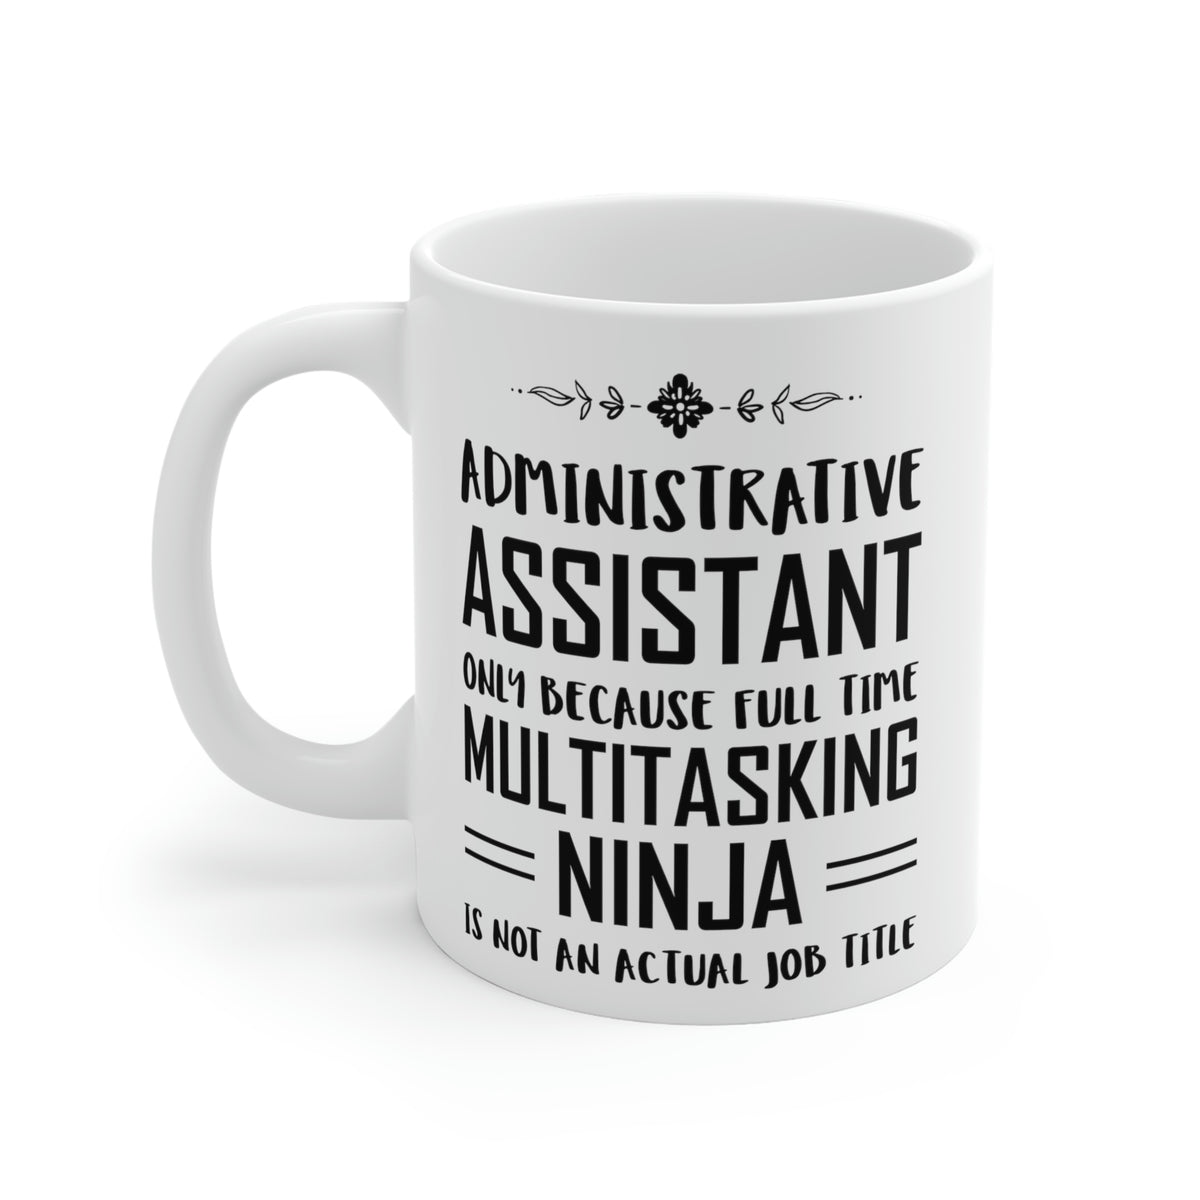 Administrative Assistant Coffee Mug - Administrative Assistant Only Because Full Time Multitasking Ninja is Not an Actual Job Title